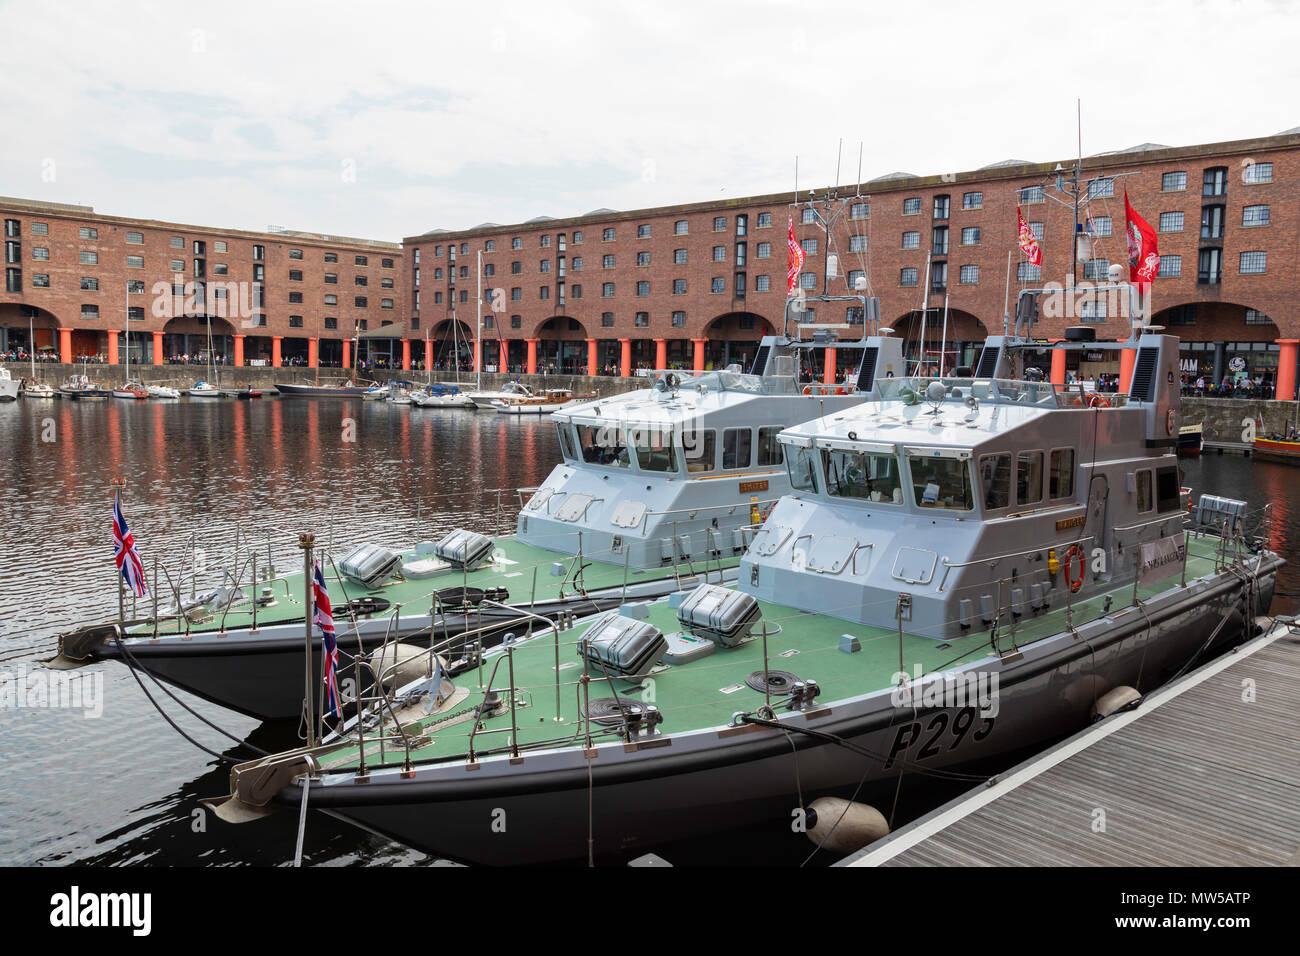 HMS Ranger (foreground) and HMS Smiter (background) Archer class patrol vessels in the Royal Navy visiting the Albert Dock Liverpool for the Tall Ship Stock Photo